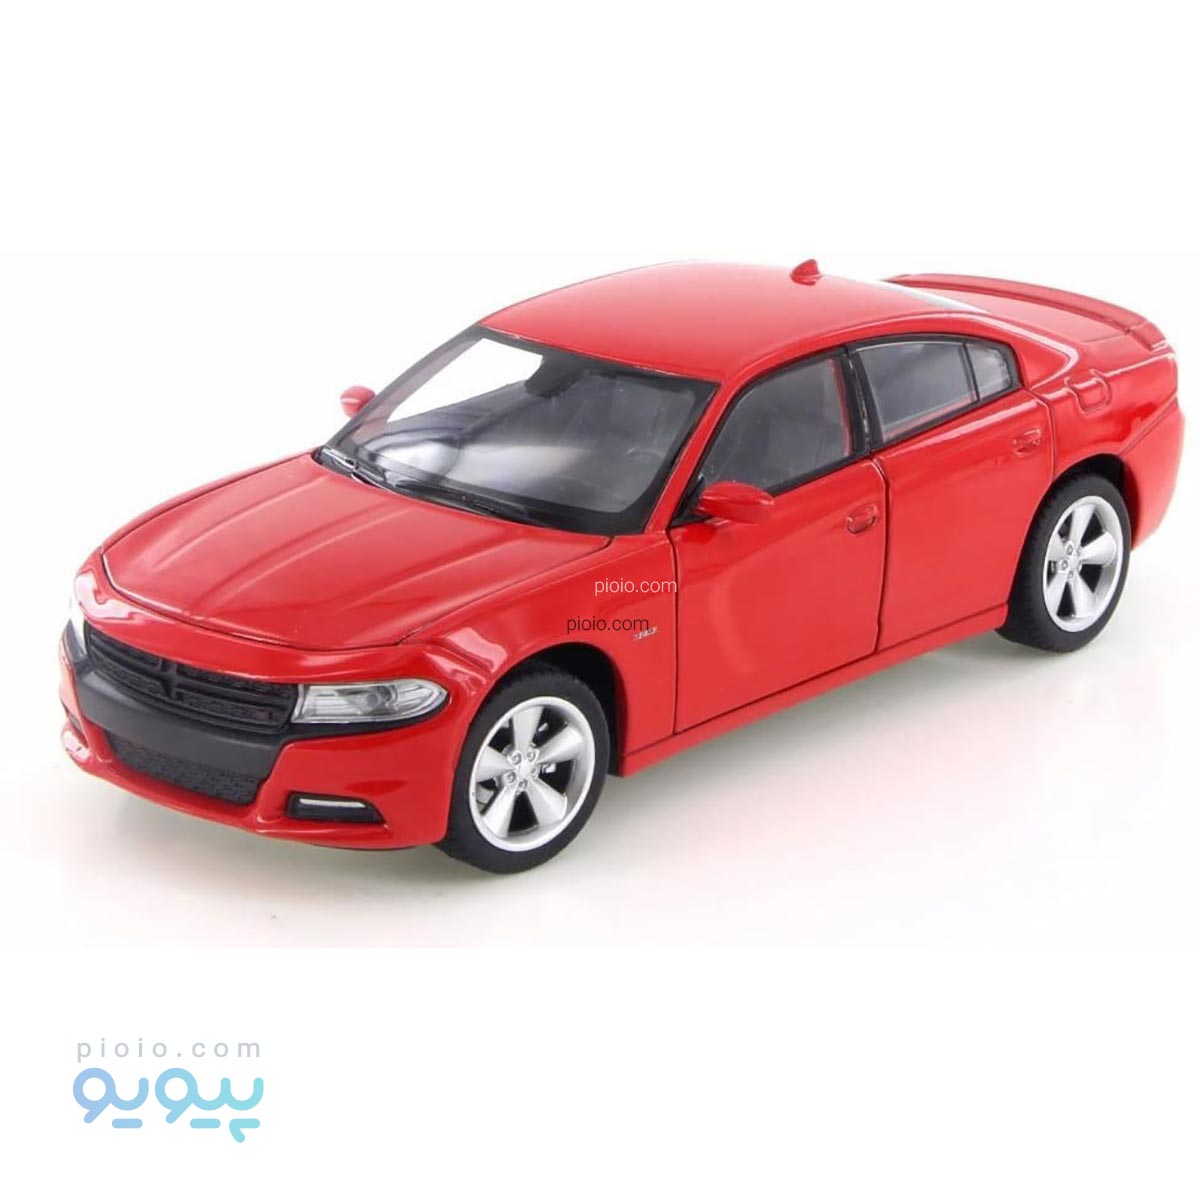 Машинки 1 24. Welly 1 24 dodge Charger. Welly dodge Charger. Игрушка модель машины 1:38 dodge Charger. Welly dodge Charger r/t 2016.